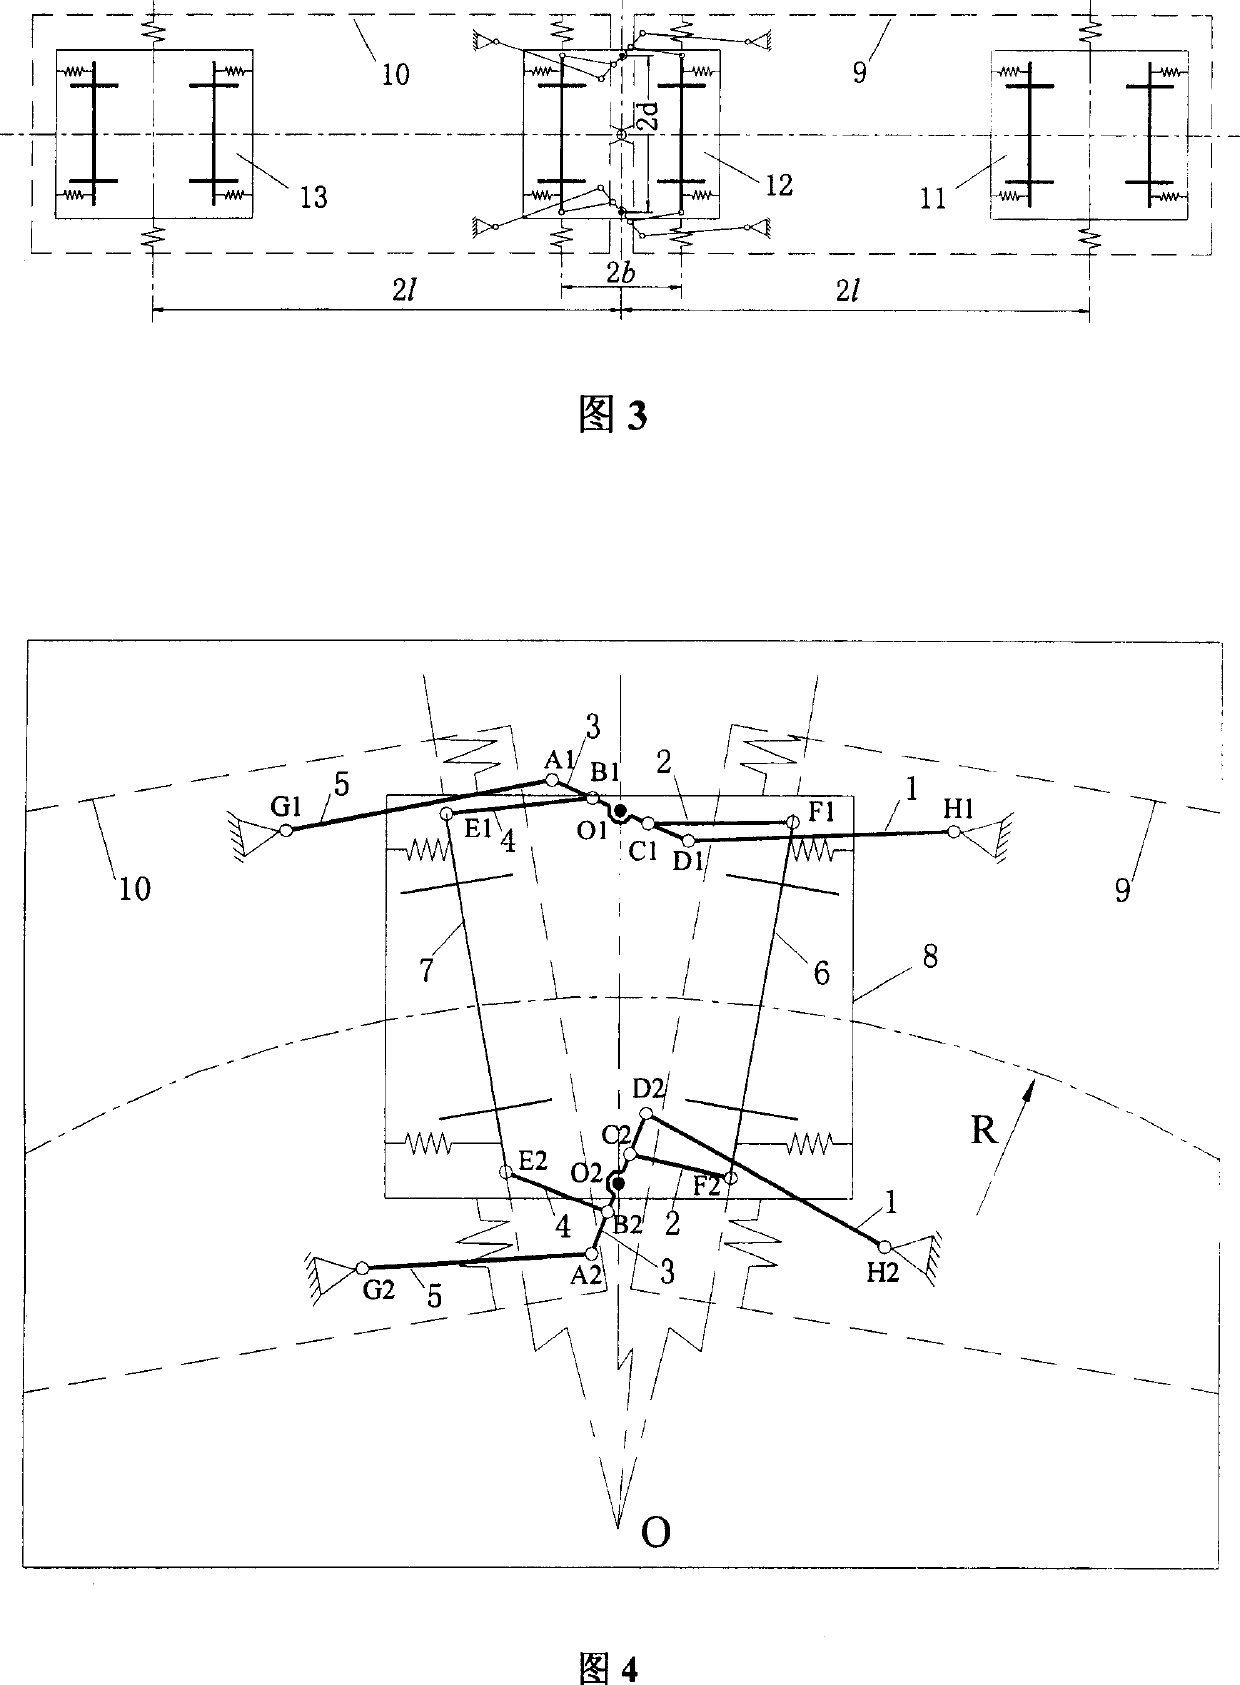 Forced guiding mechanism of independent wheel pair two-axle bogie articulated car